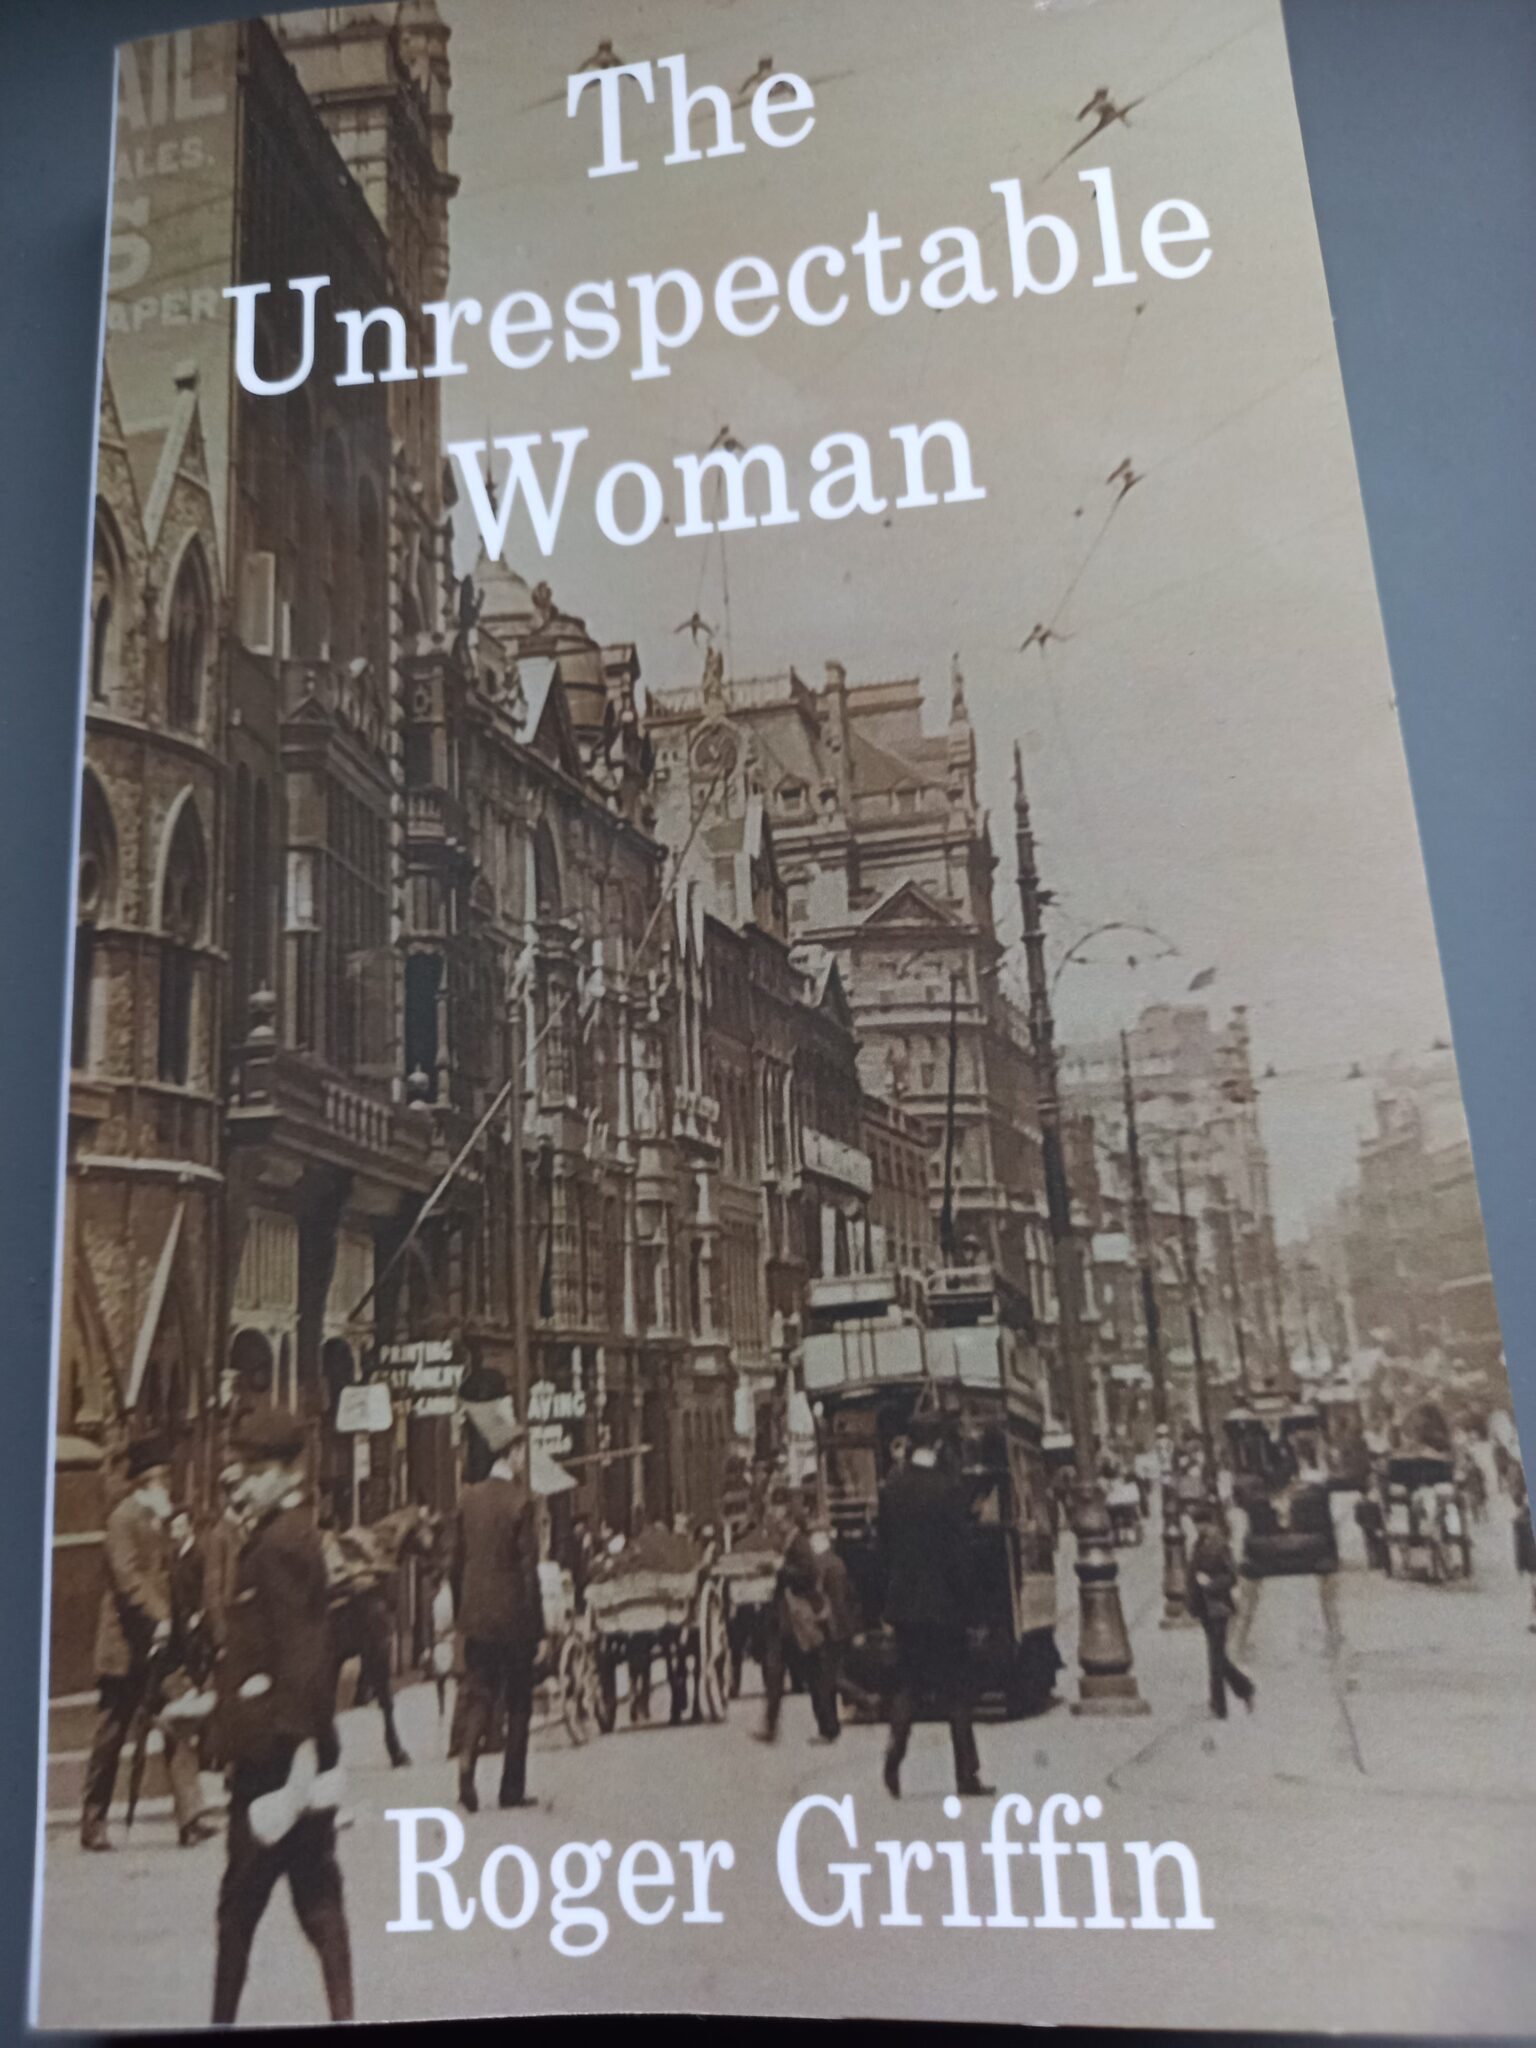 A book cover in black and white of a photo of an Edwardian Cardiff street.